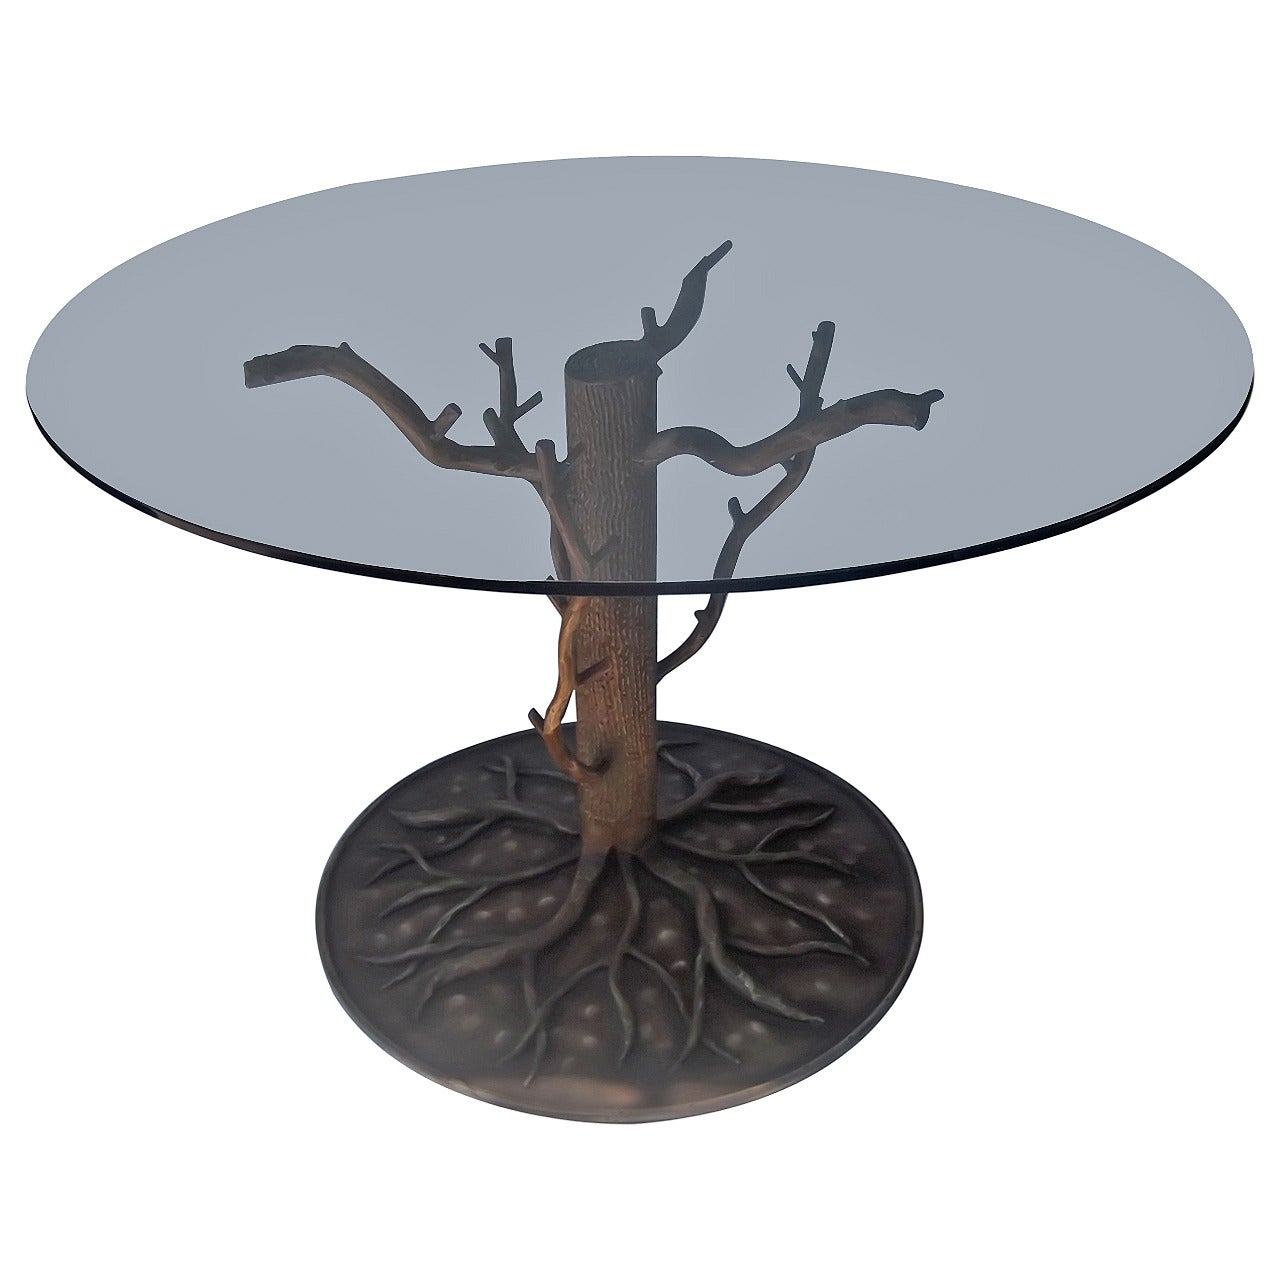 Painted Steel "Tree and Branch" Center Dining Table